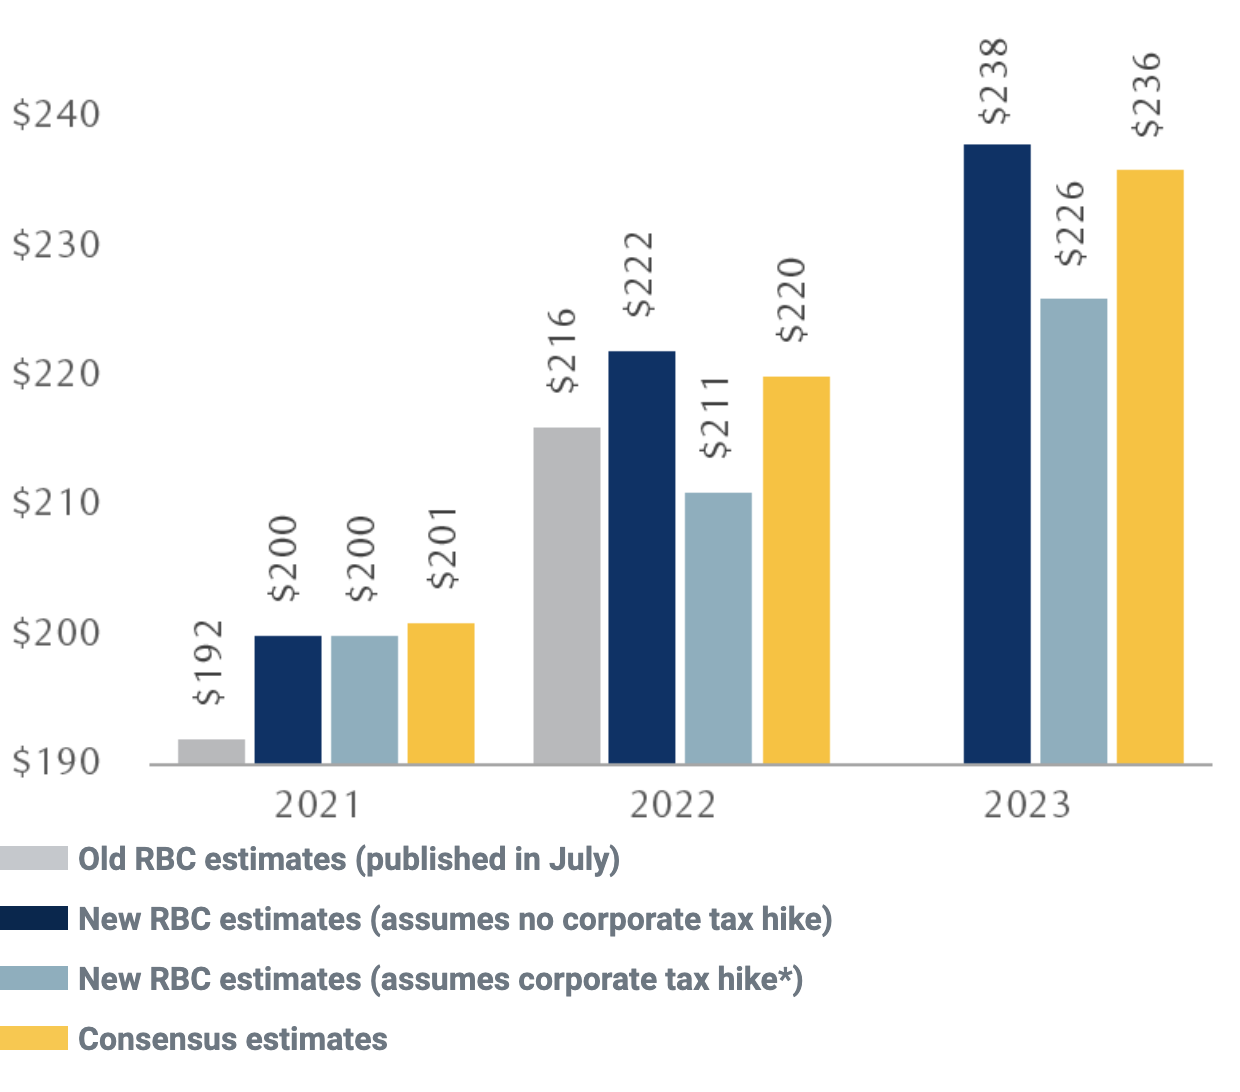 The chart shows RBC Capital Markets’ previous and current estimates of S&P 500 annual earnings per share (EPS) for 2021, 2022, and 2023 compared to consensus estimates. Old RBC estimates (July 2021): $192, $216, (no estimate). New RBC estimates assuming no corporate tax hike: $200, $222, $238. New RBC estimates assuming a corporate tax hike from 21% to 25% beginning in 2022: $200, $211, $226. Consensus estimates: $201, $220, $236.